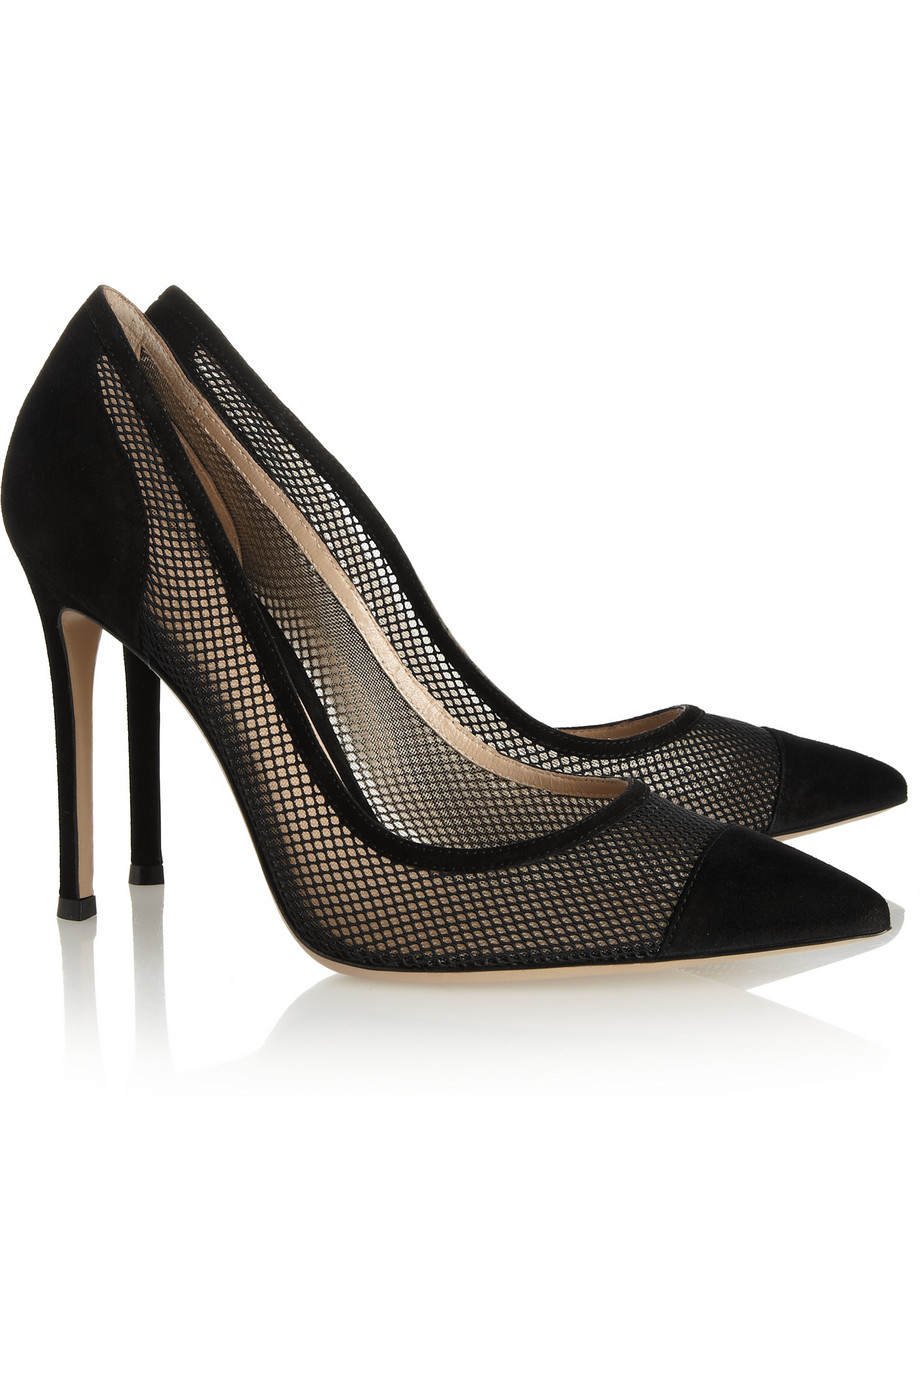 Gianvito rossi Suede and Mesh Pumps in Black | Lyst